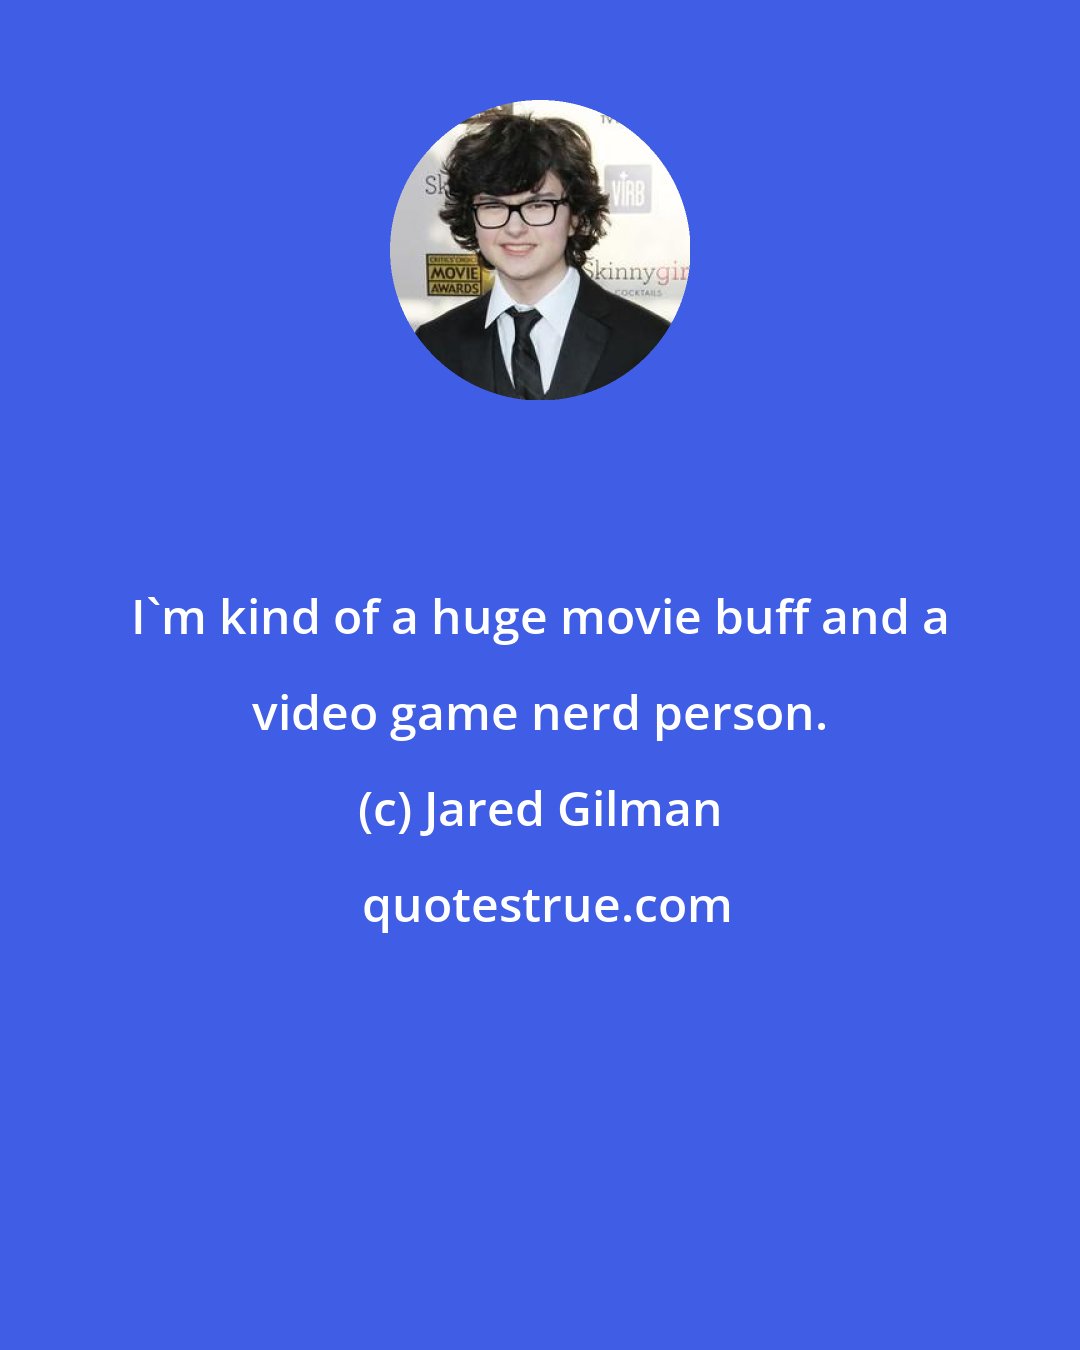 Jared Gilman: I'm kind of a huge movie buff and a video game nerd person.